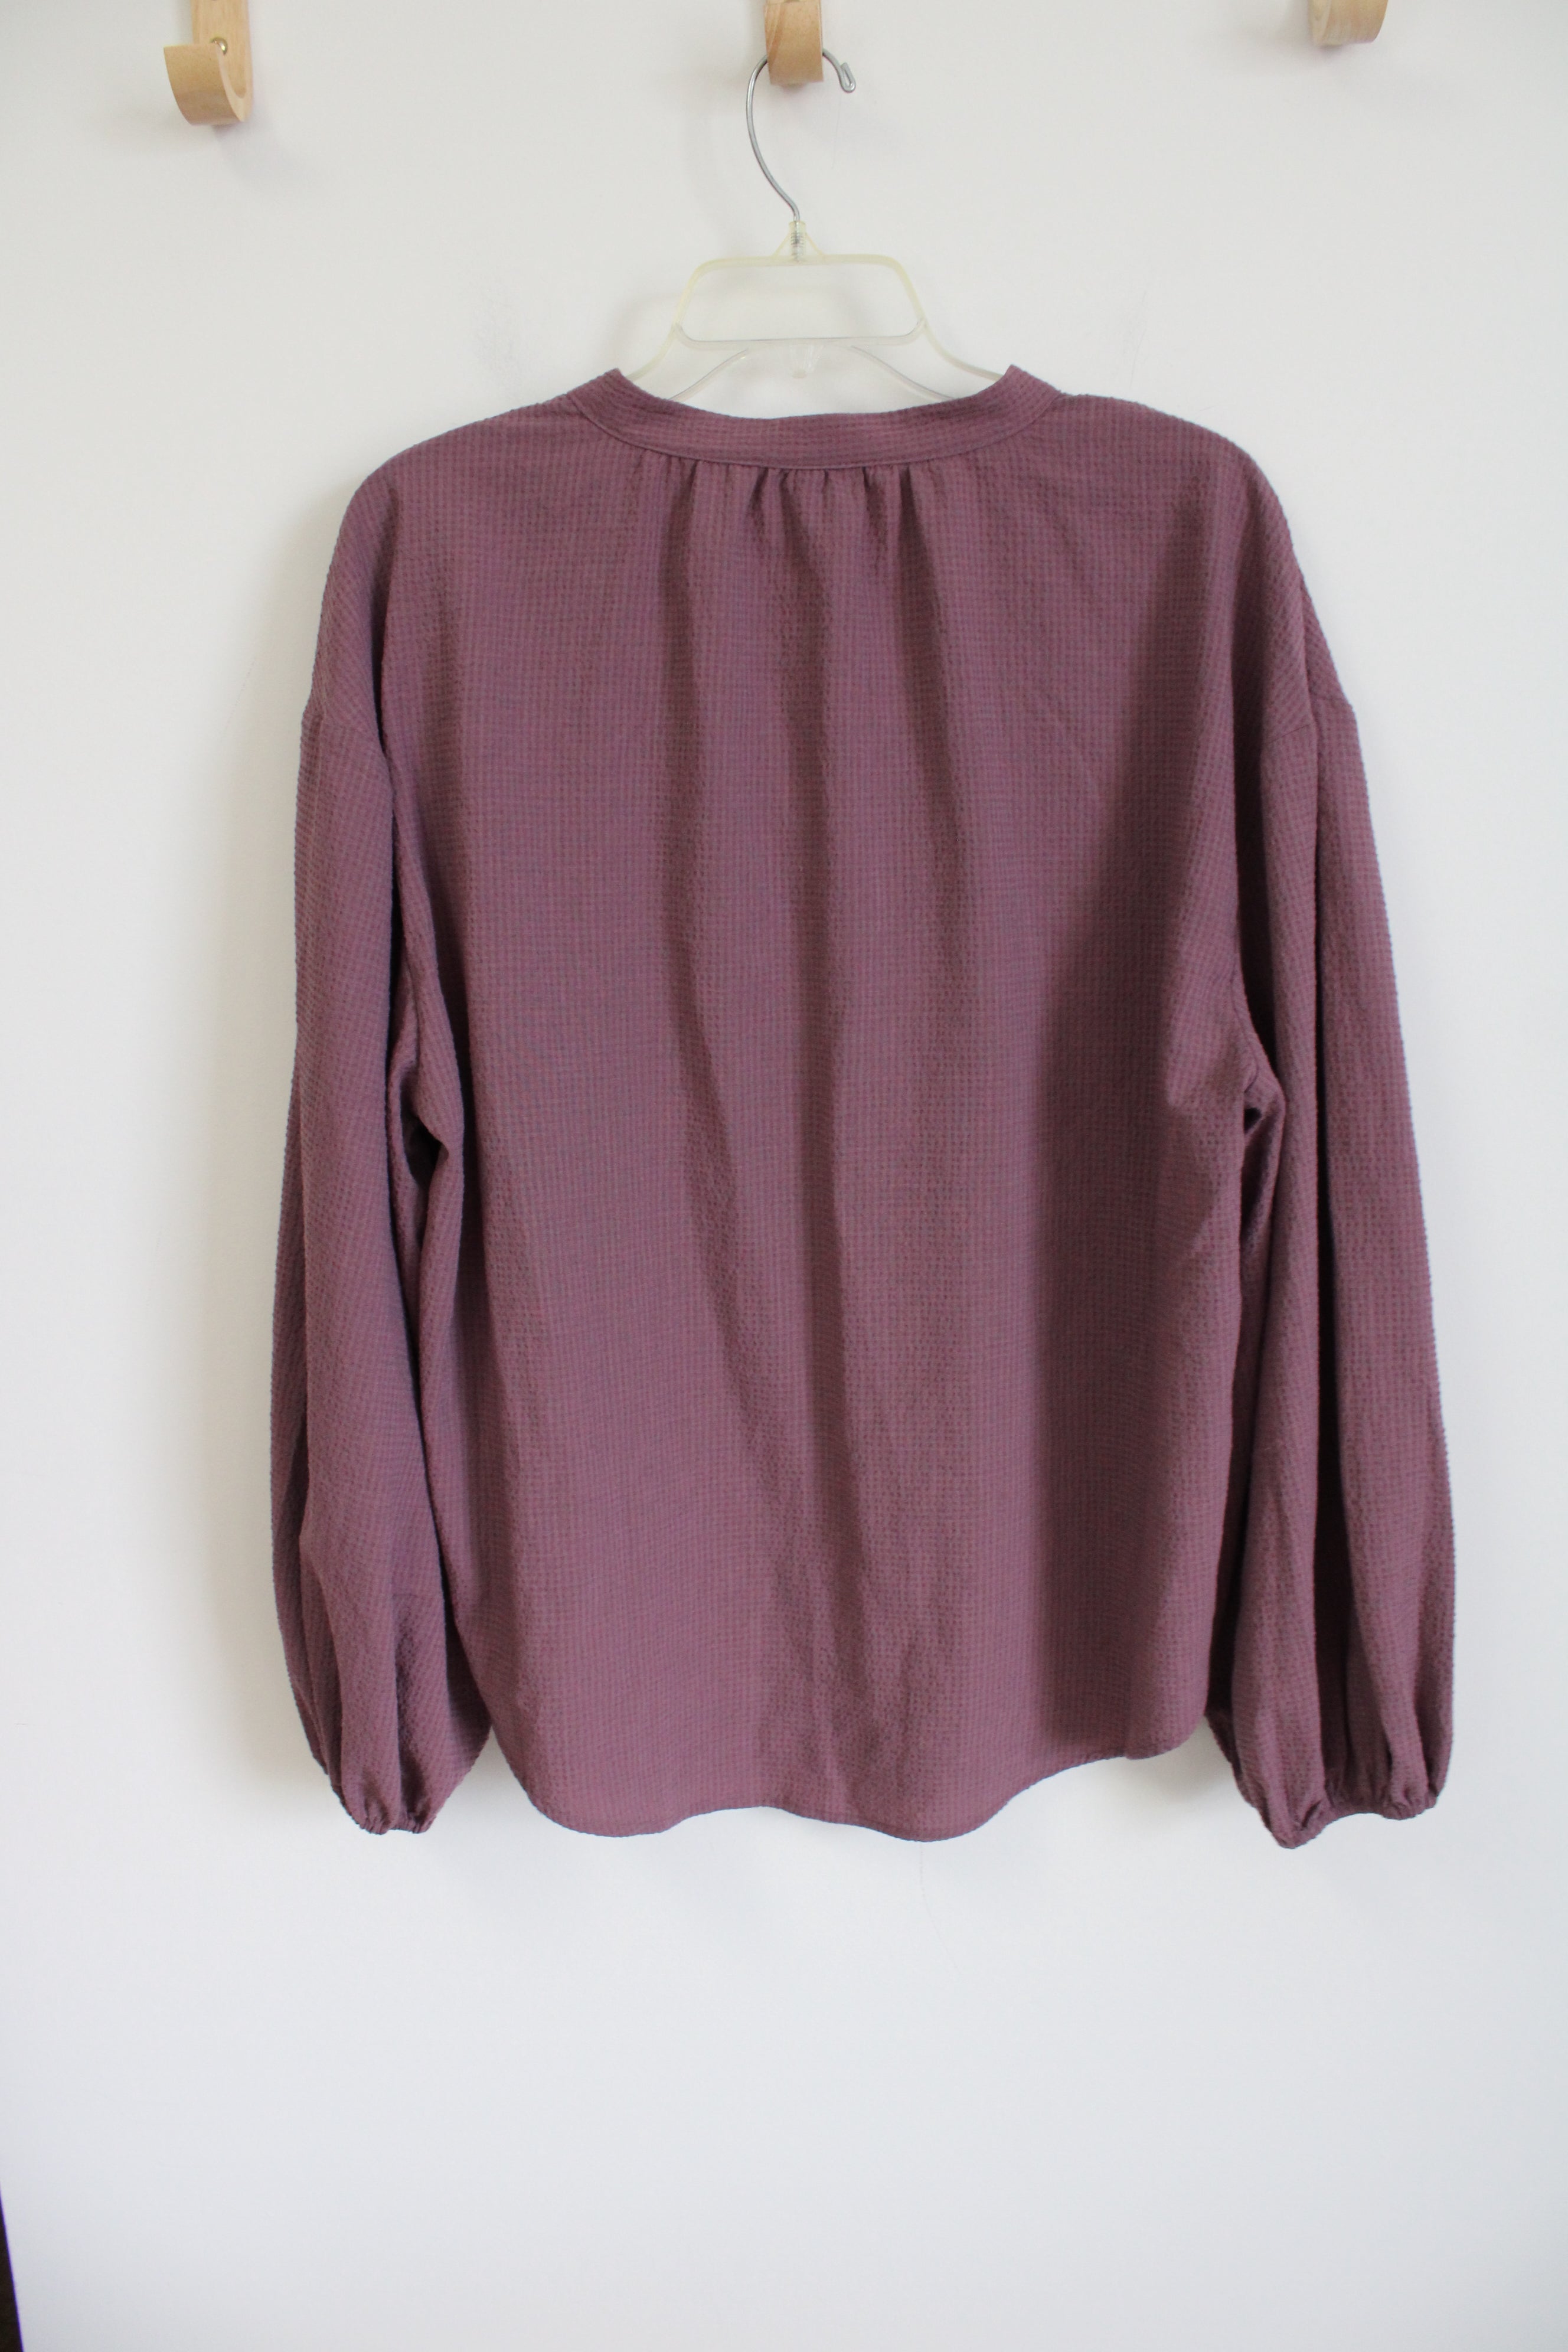 NEW A New Day Purple Top | XL